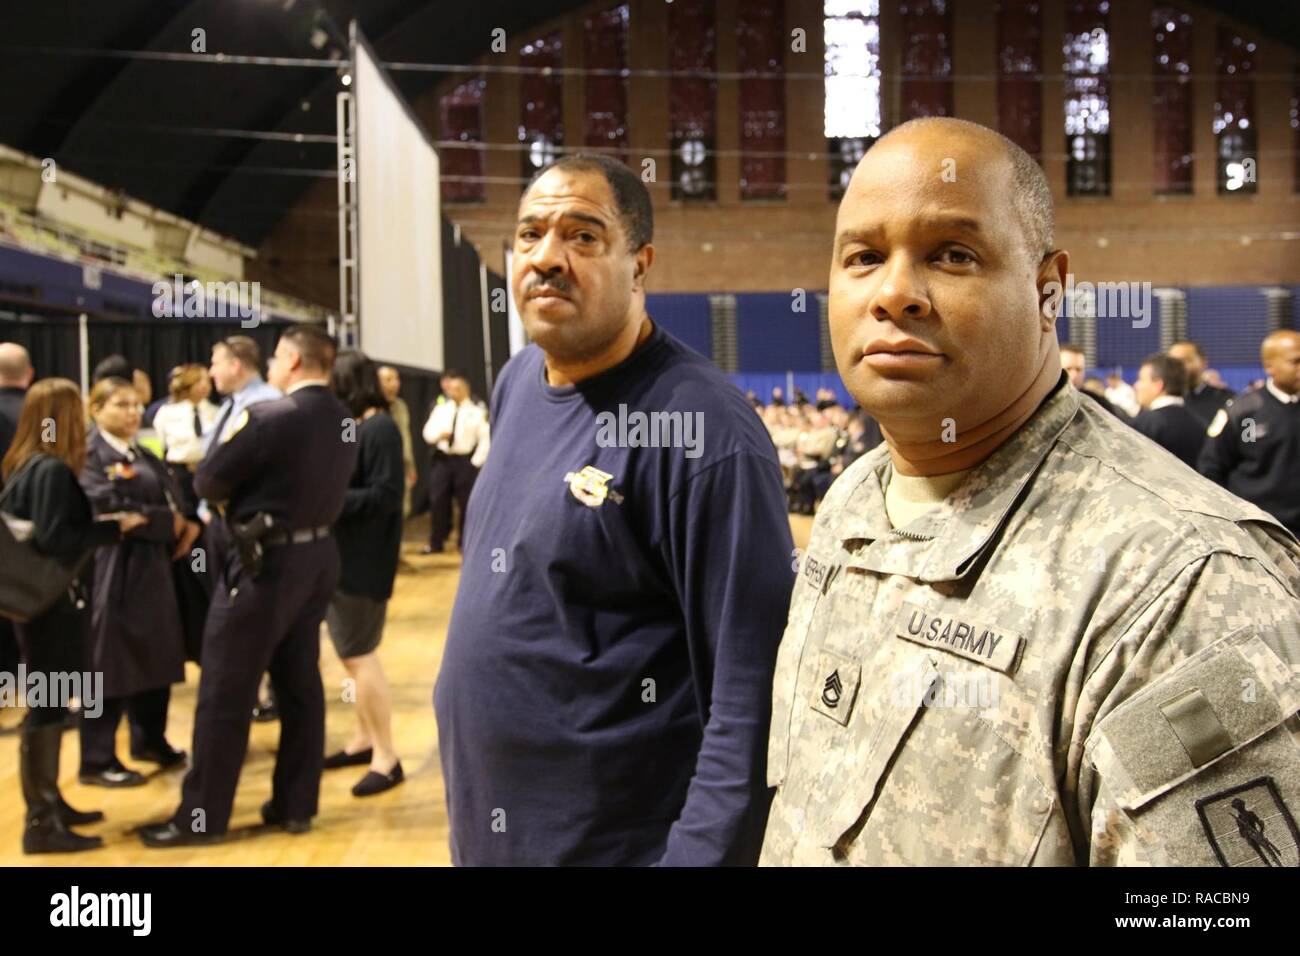 U.S. Army Sgt. 1st Class Earlito Frazer-Sinclair,  information branch chief  and Master Sgt. Rodney Spencer, facility program and planning manager, District of Columbia National Guard watch the swearing-in of police officers in Washington, D.C. on Jan. 19, 2017. The Metropolitan Police Department held a swearing-in of police officers from several states at the DC Armory in support of the 58th Presidential Inauguration, Jan.20. (National Guard Stock Photo